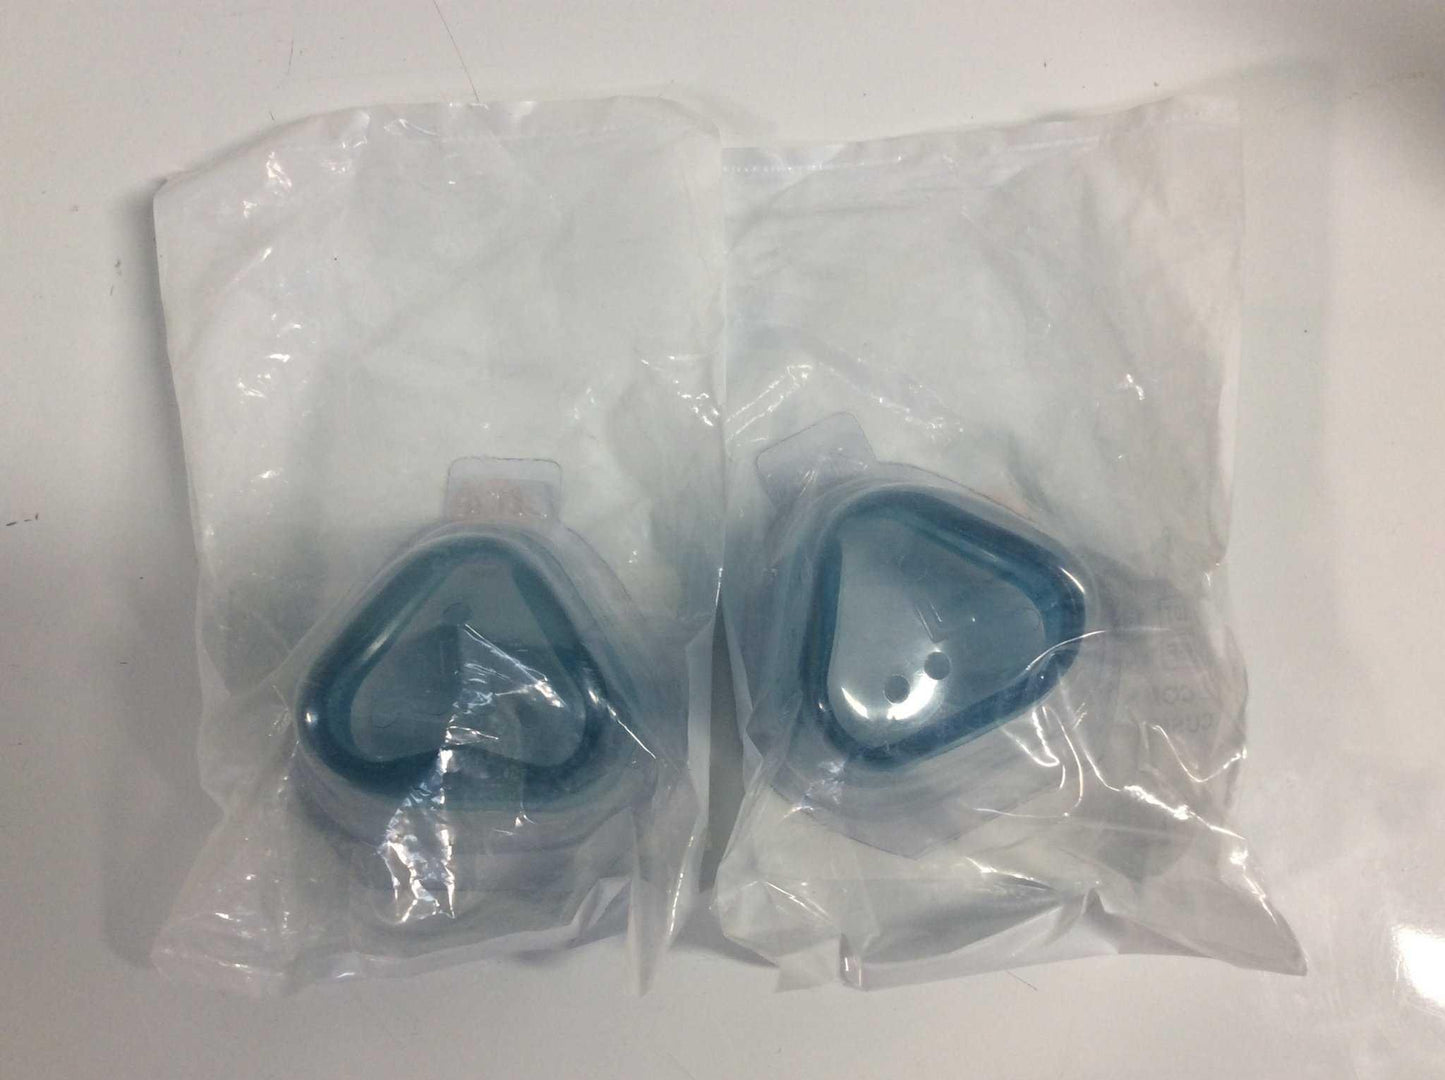 Lot of 2 NEW Philips Respironics Large ComfortGel Nasal Cushion 1009051 FREE Shipping - MBR Medicals